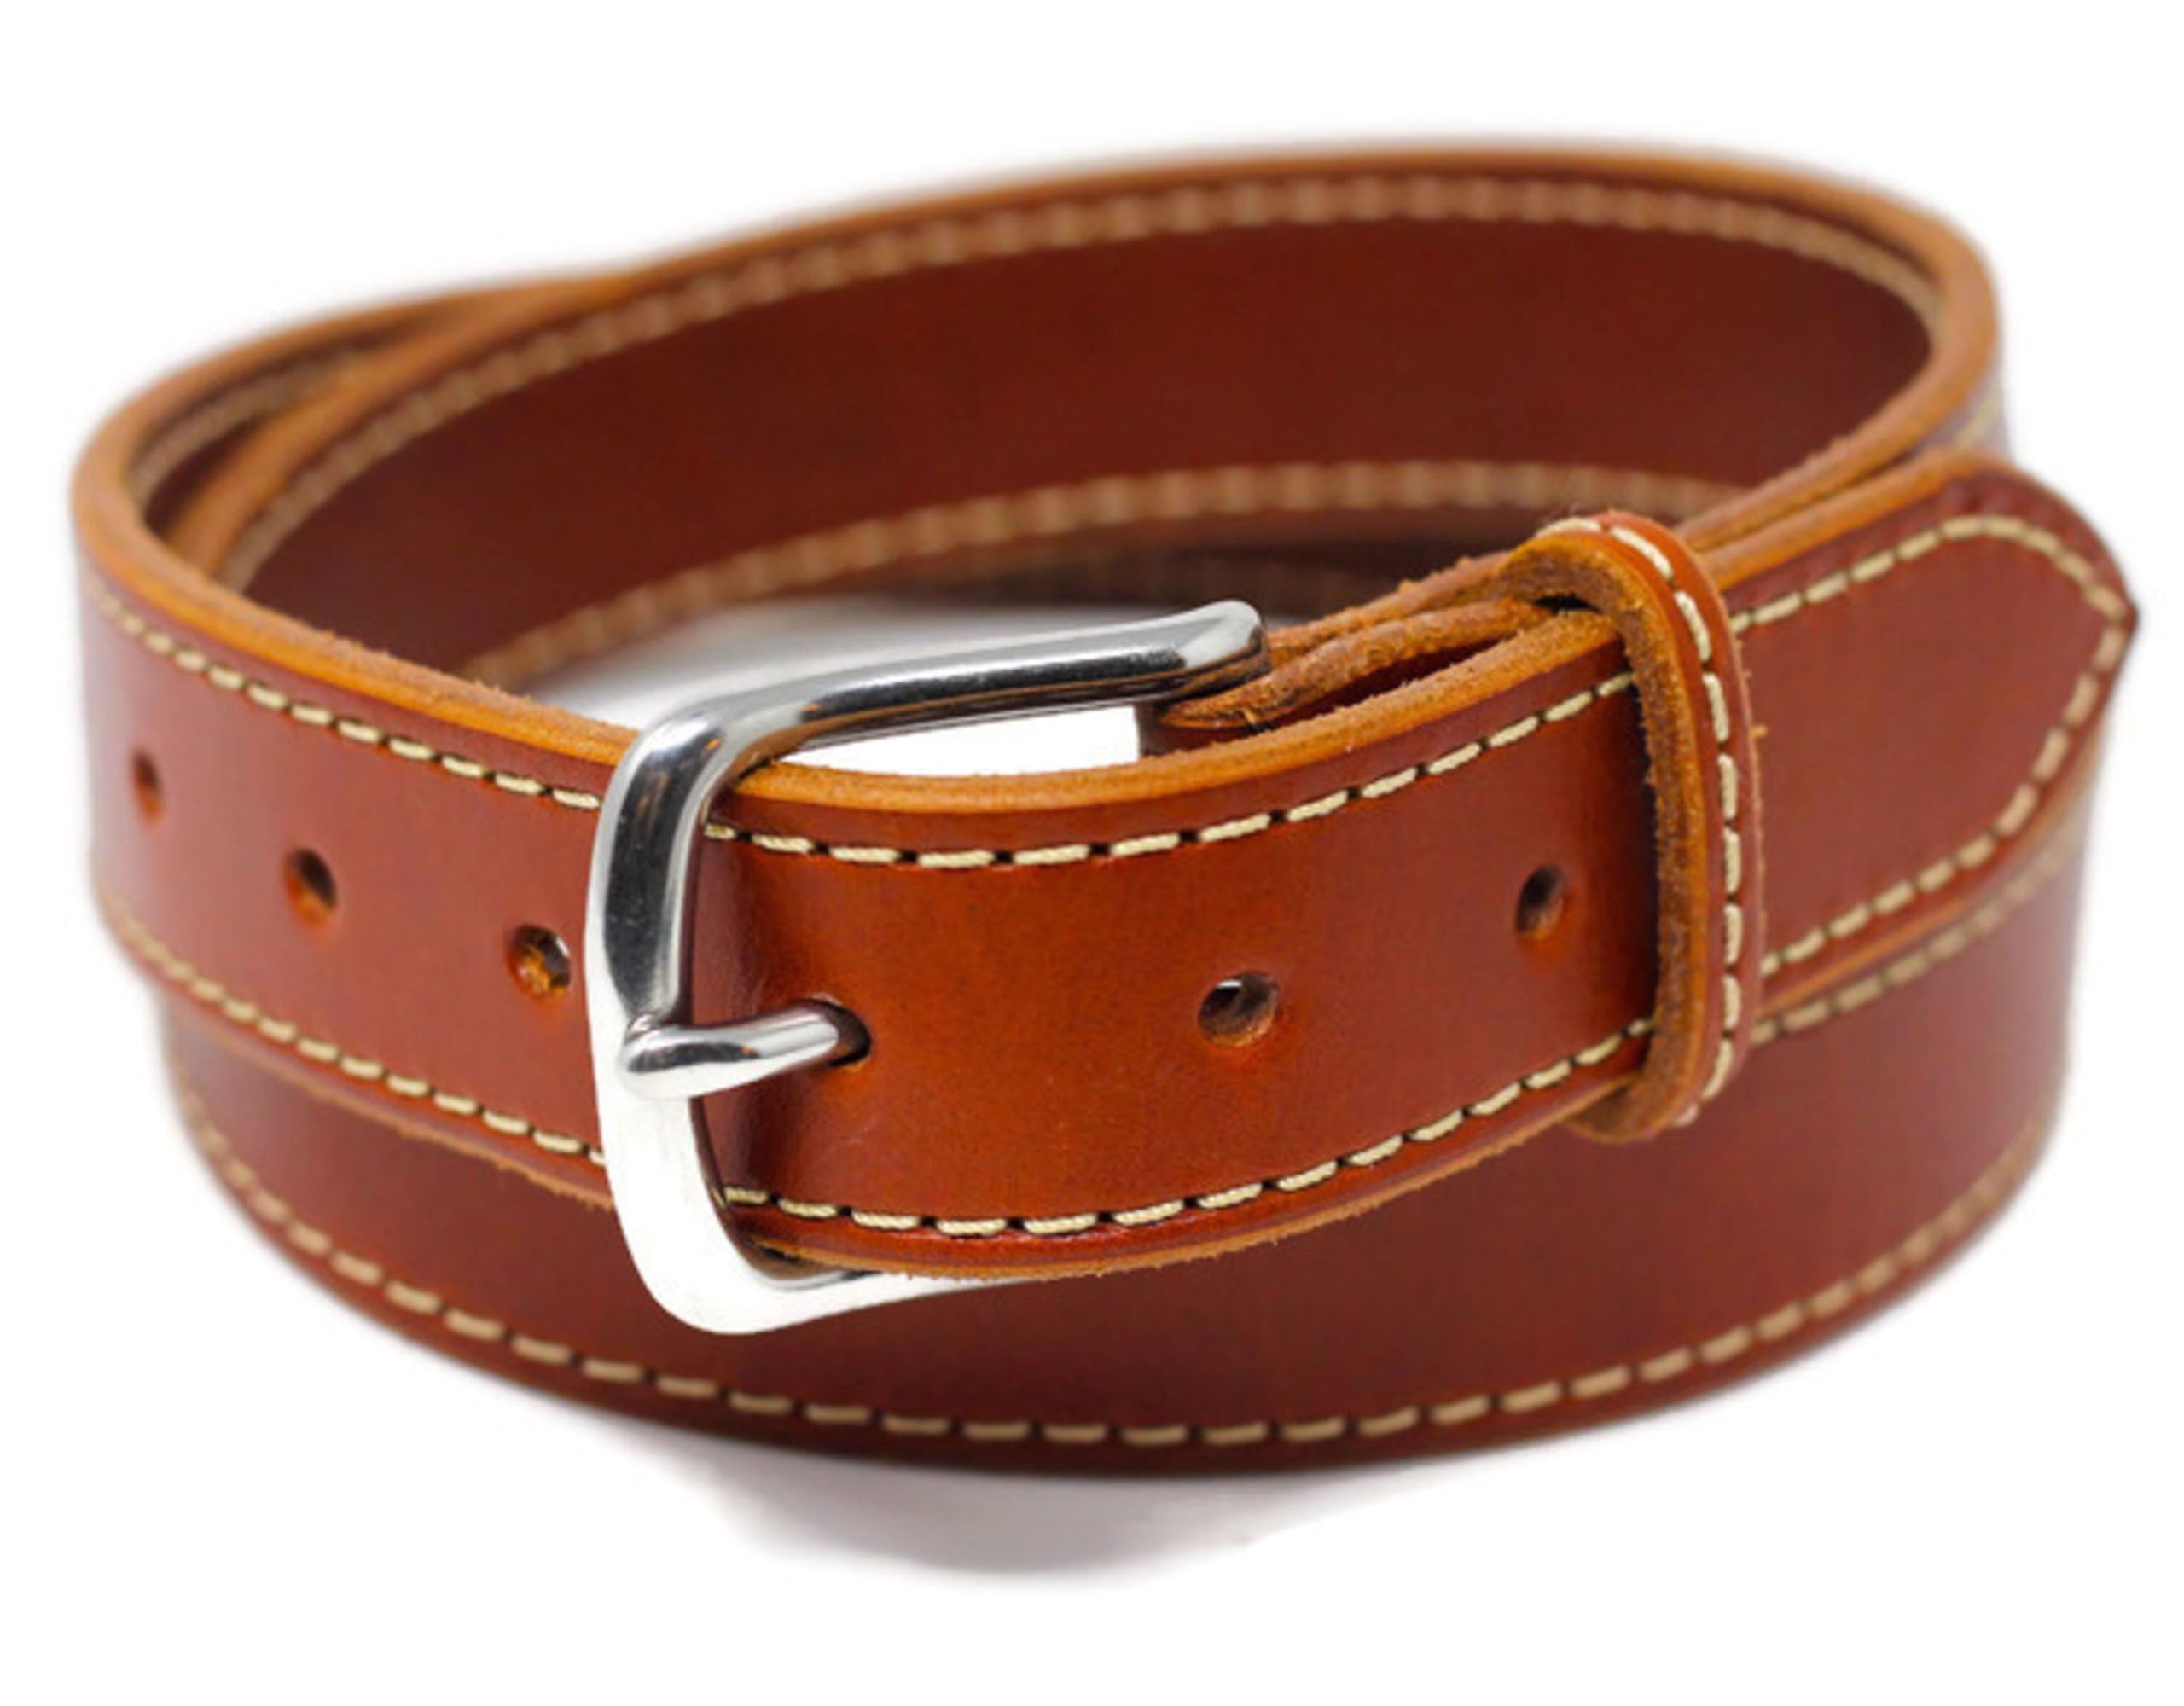 Bridle Leather Belts with stitching 1.25 inch width – Tempi Design Studio